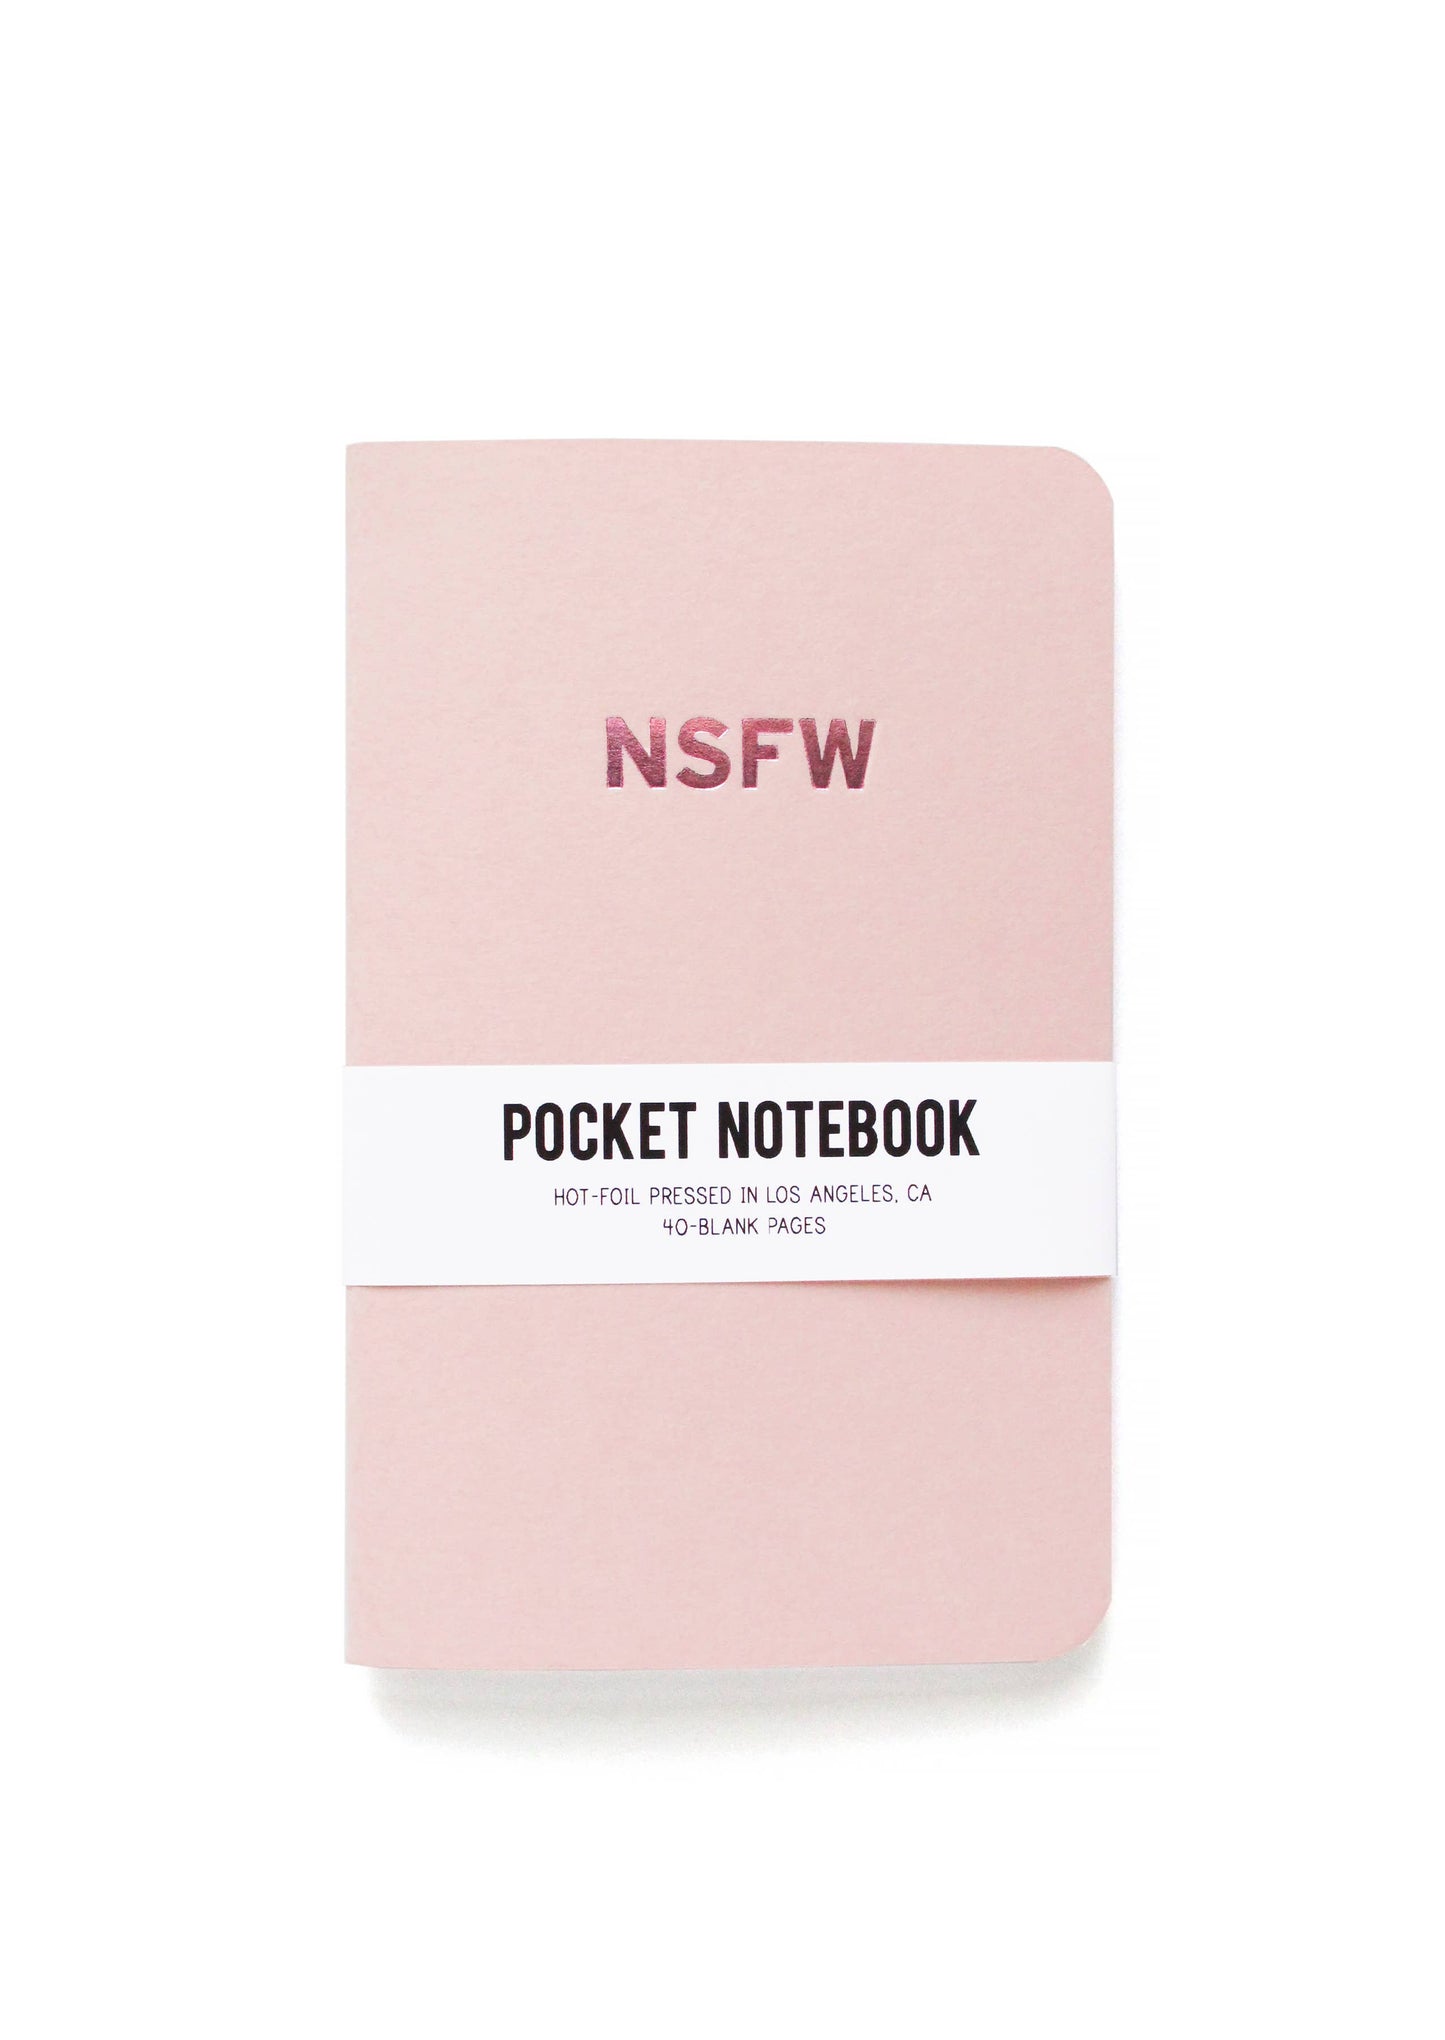 WORD FOR WORD Factory - NSFW - Pocket Notebook